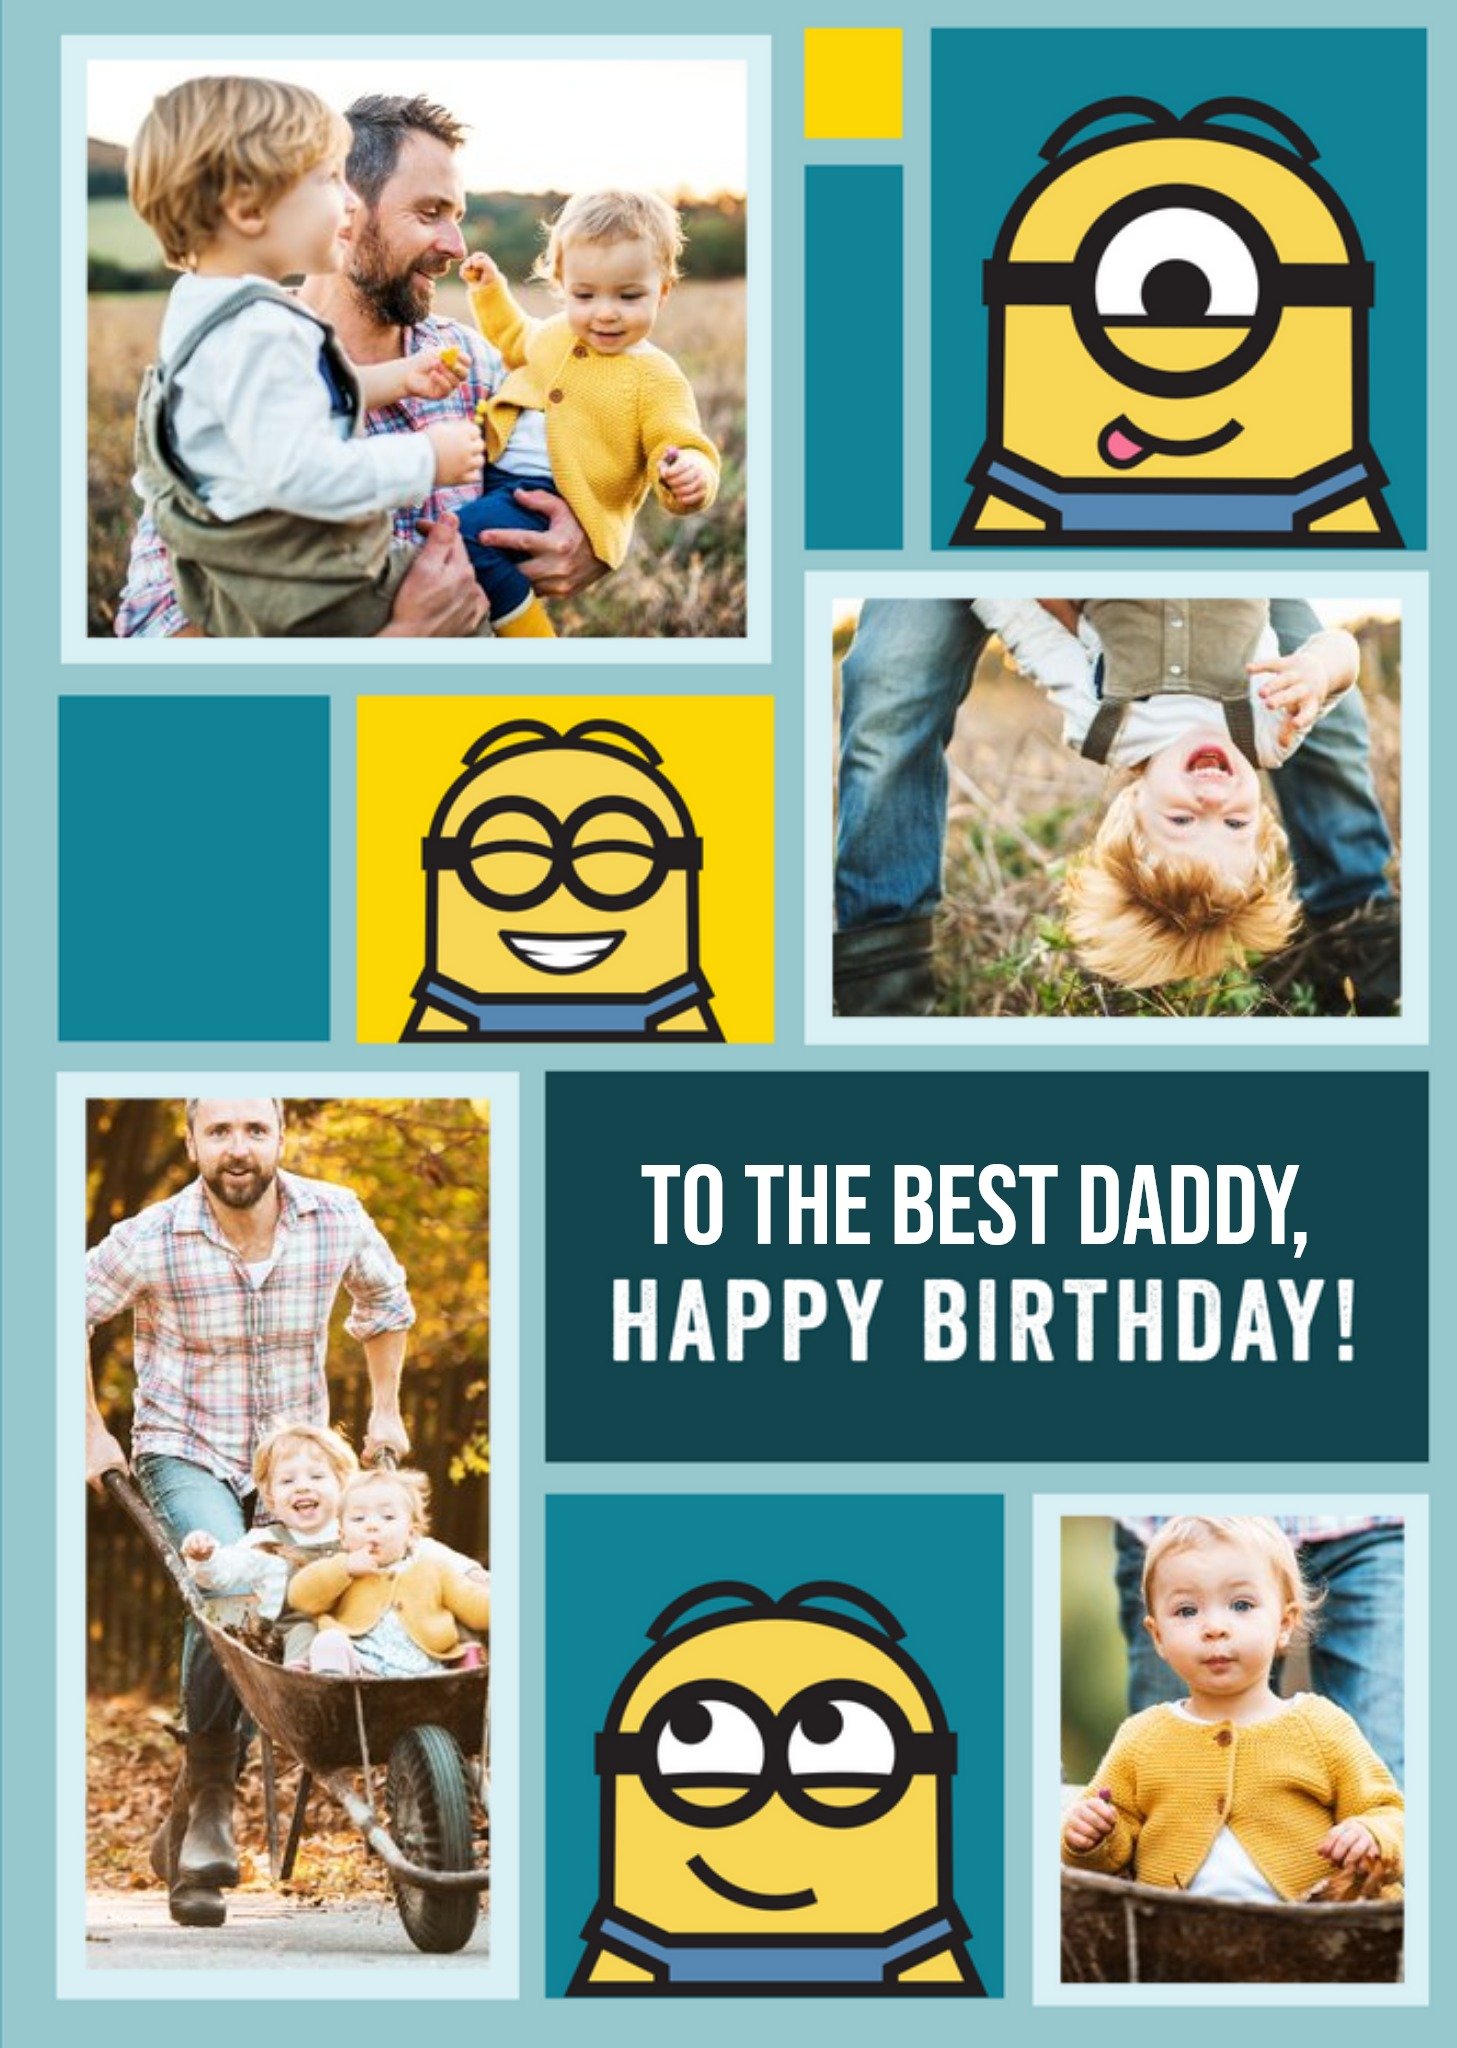 Despicable Me Minions Best Daddy Photo Upload Birthday Card, Large